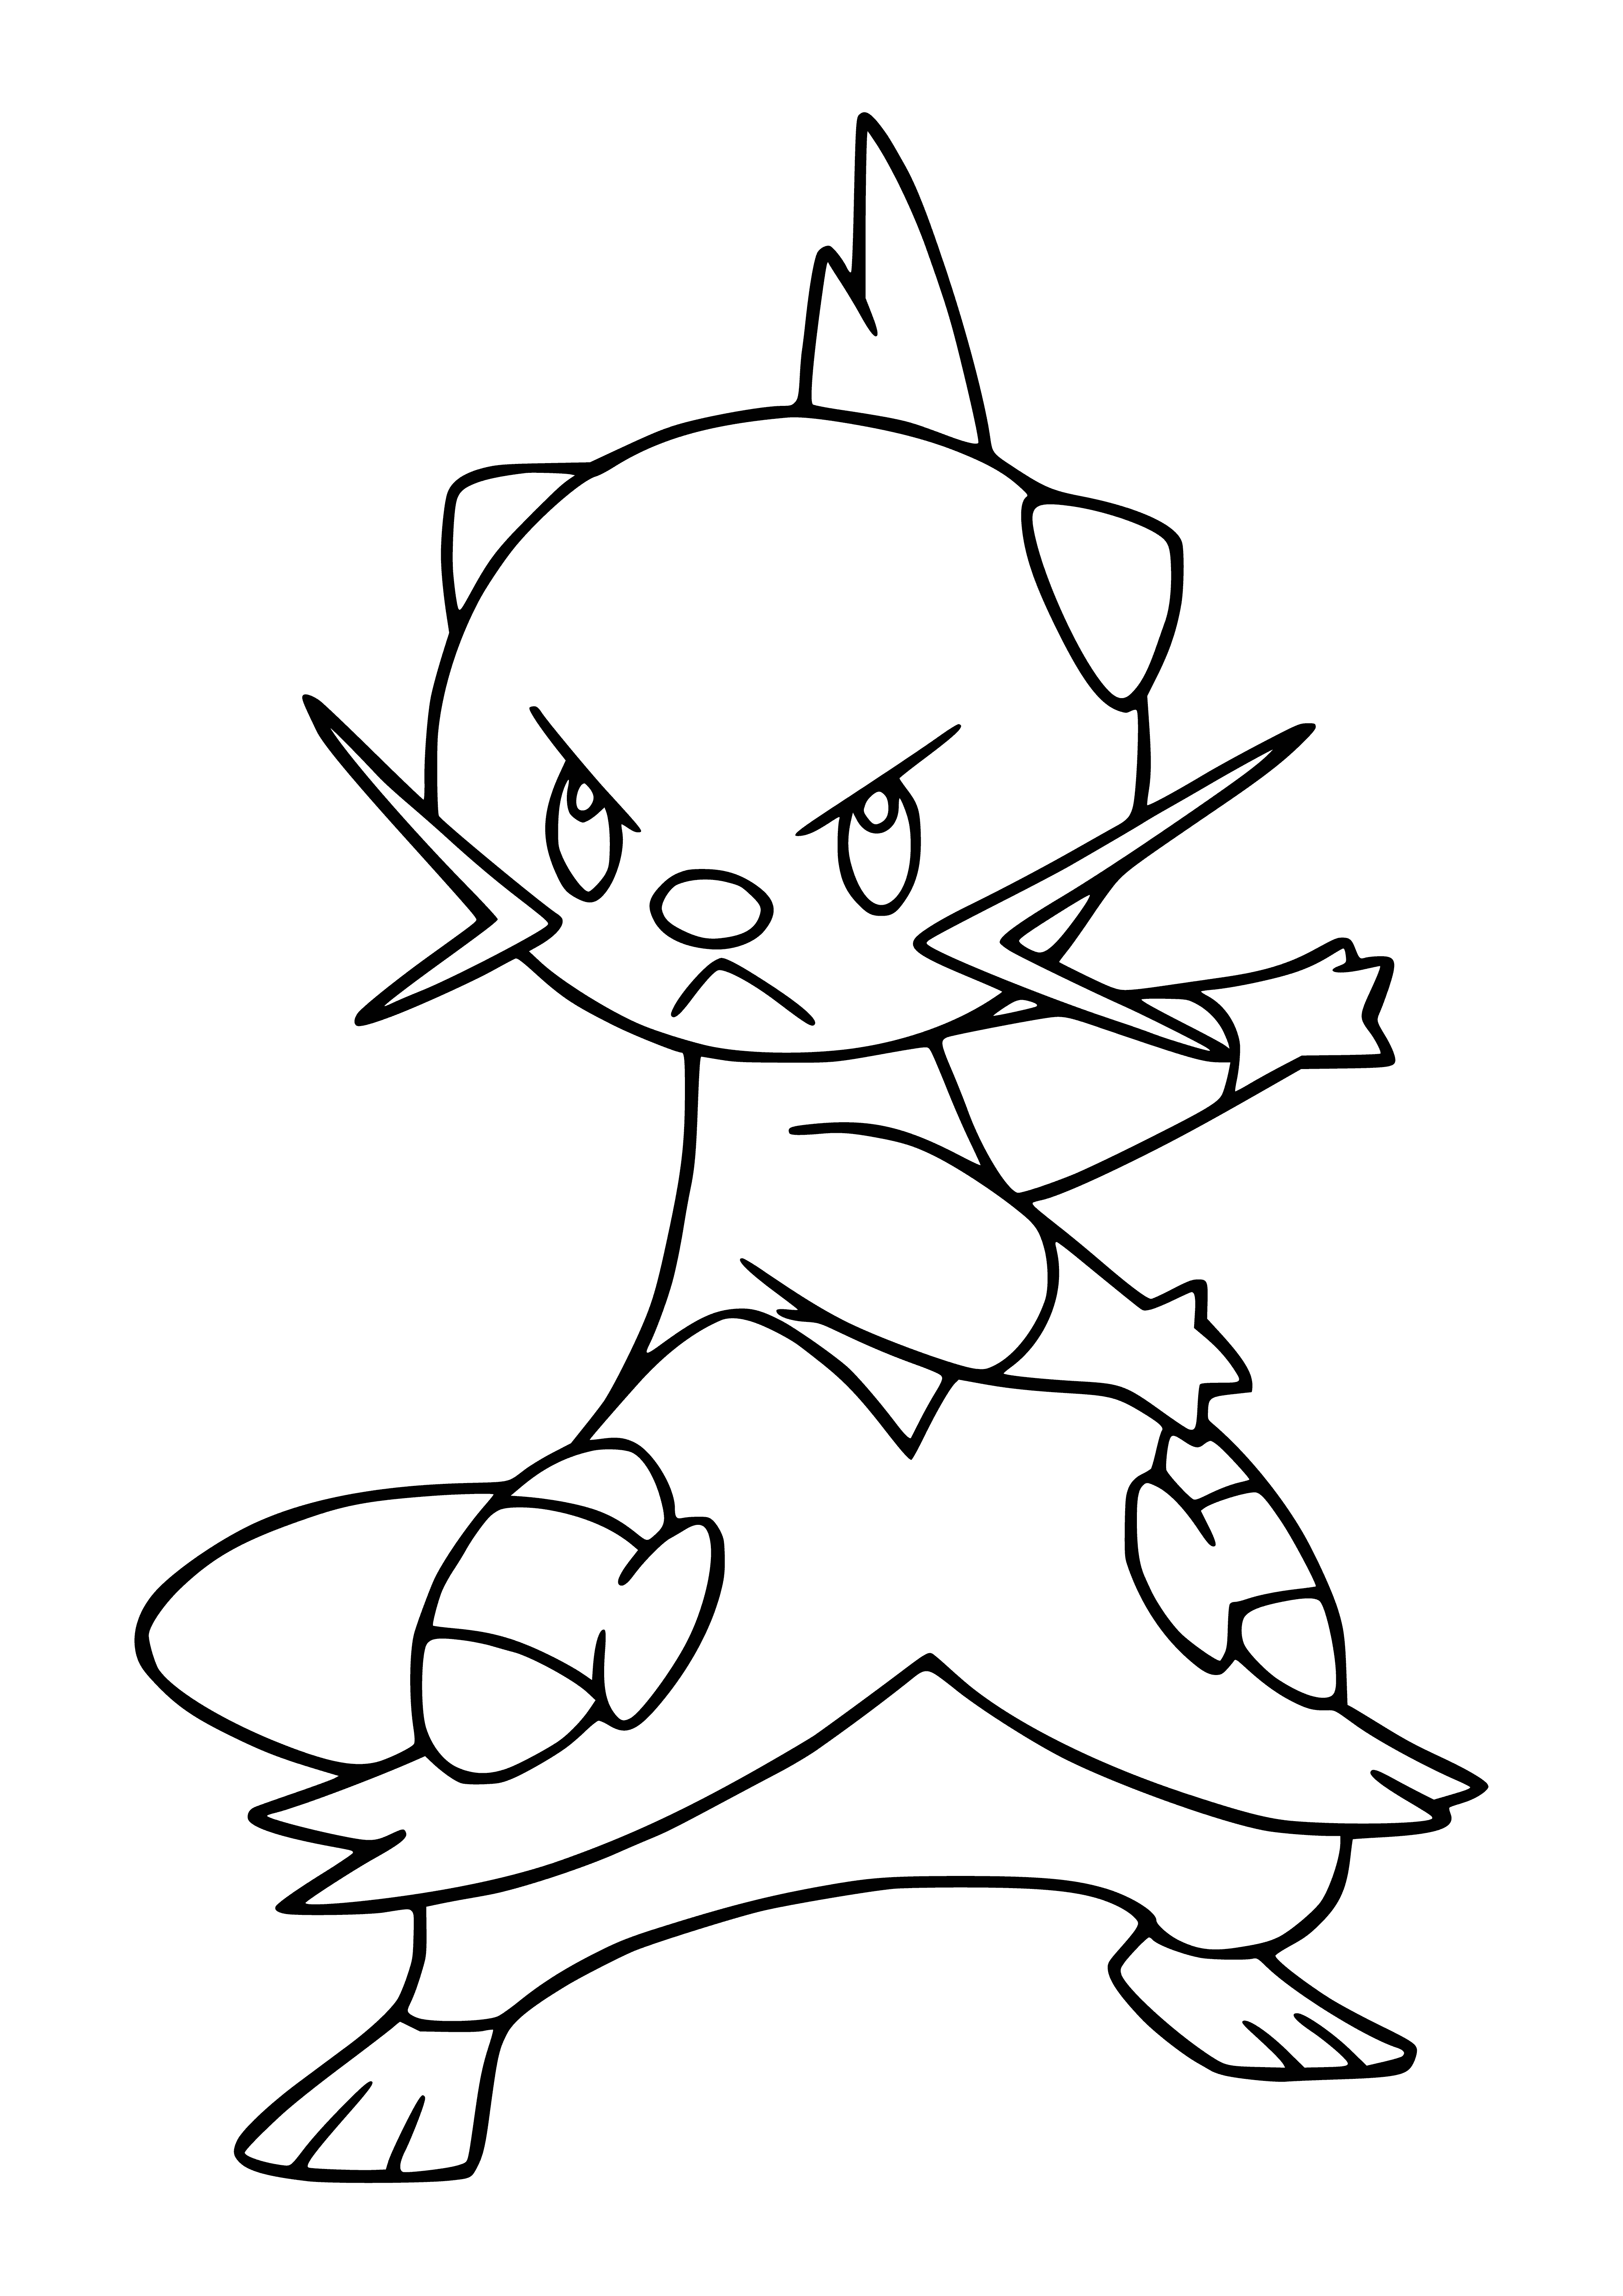 coloring page: Pokémon Dewott is a blue, two-starred evolution of Oshawott with two white claws, white stomach, white tail and two white stripes on blue legs. It carries two shells.